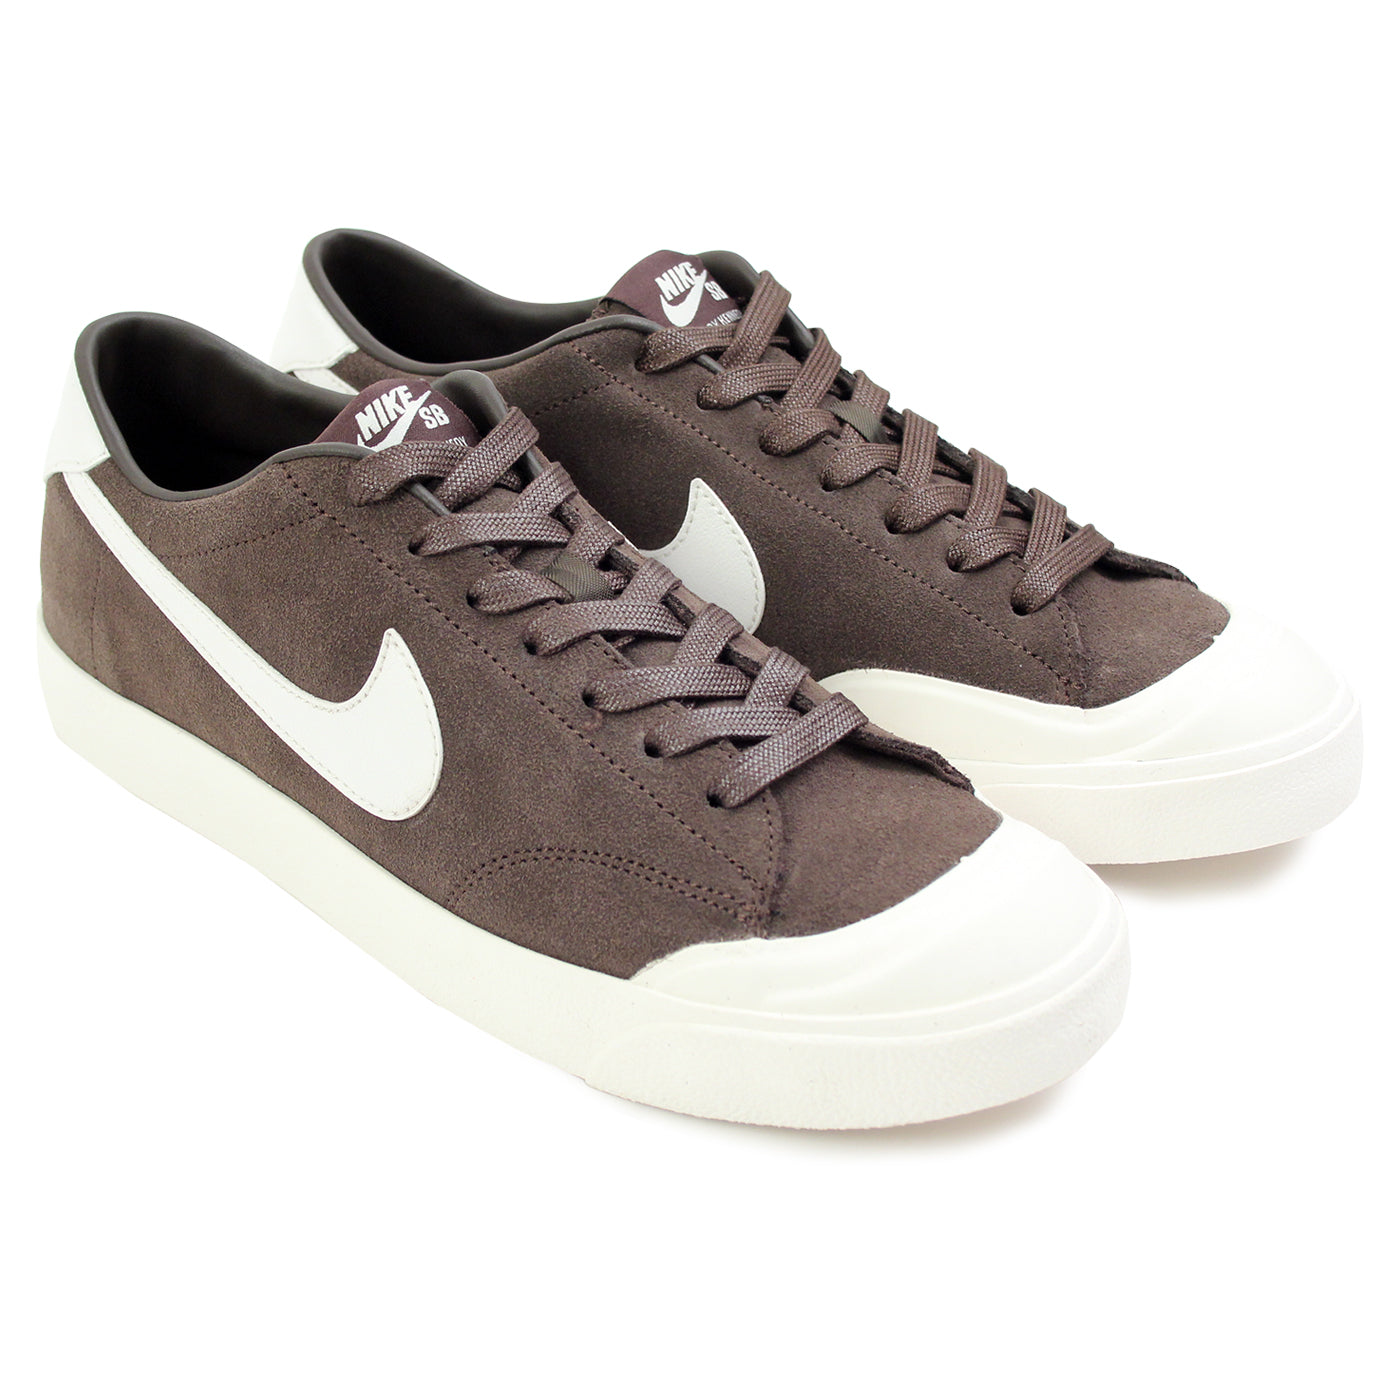 Zoom All Court CK QS in Baroque Brown/Ivory by Nike SB | Bored of